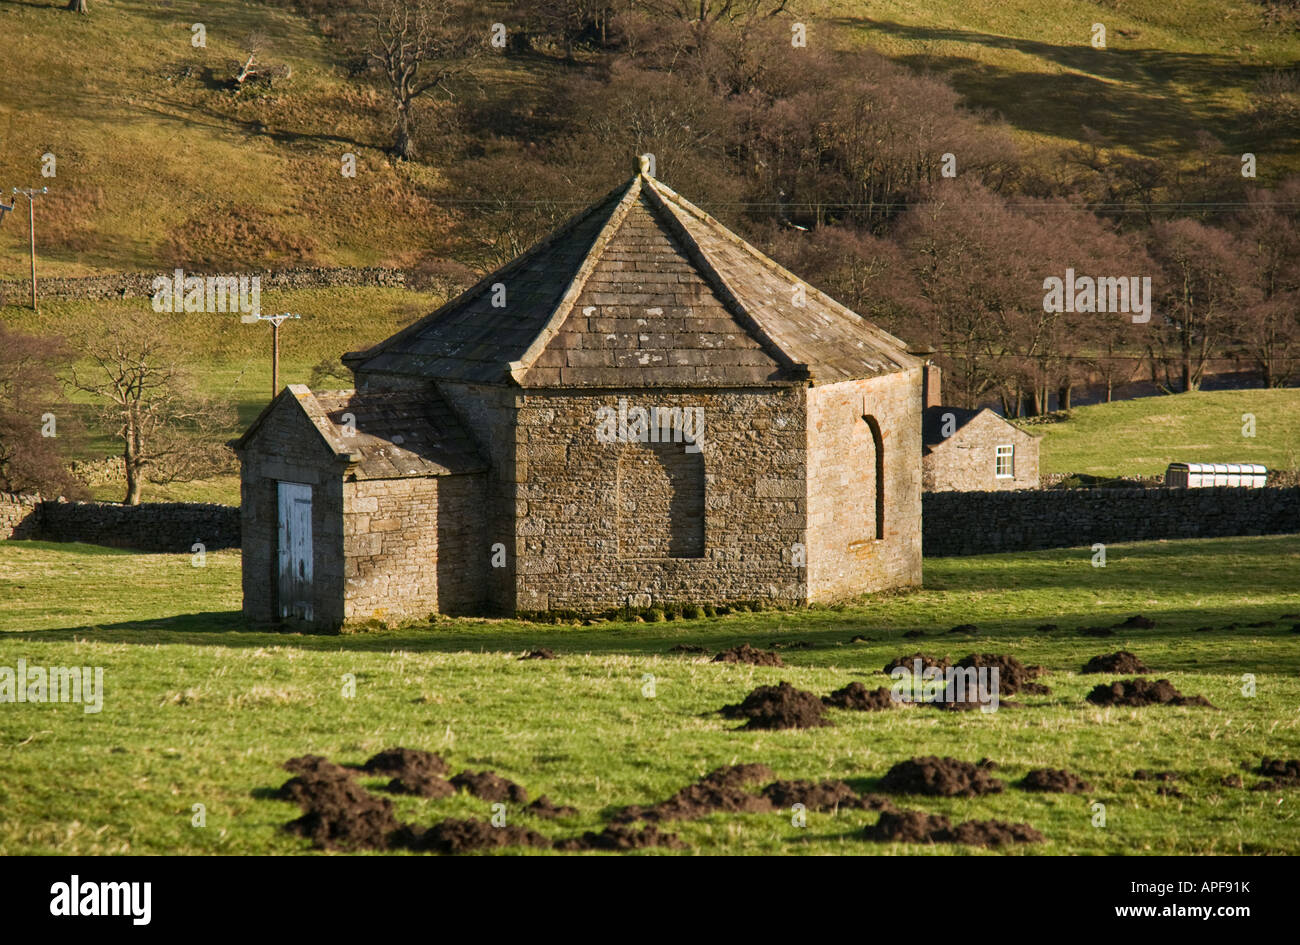 The Powder Store, Langthwaite, Arkengarthdale, Yorkshire Dales. A relic of the Lead Mining industry. Stock Photo